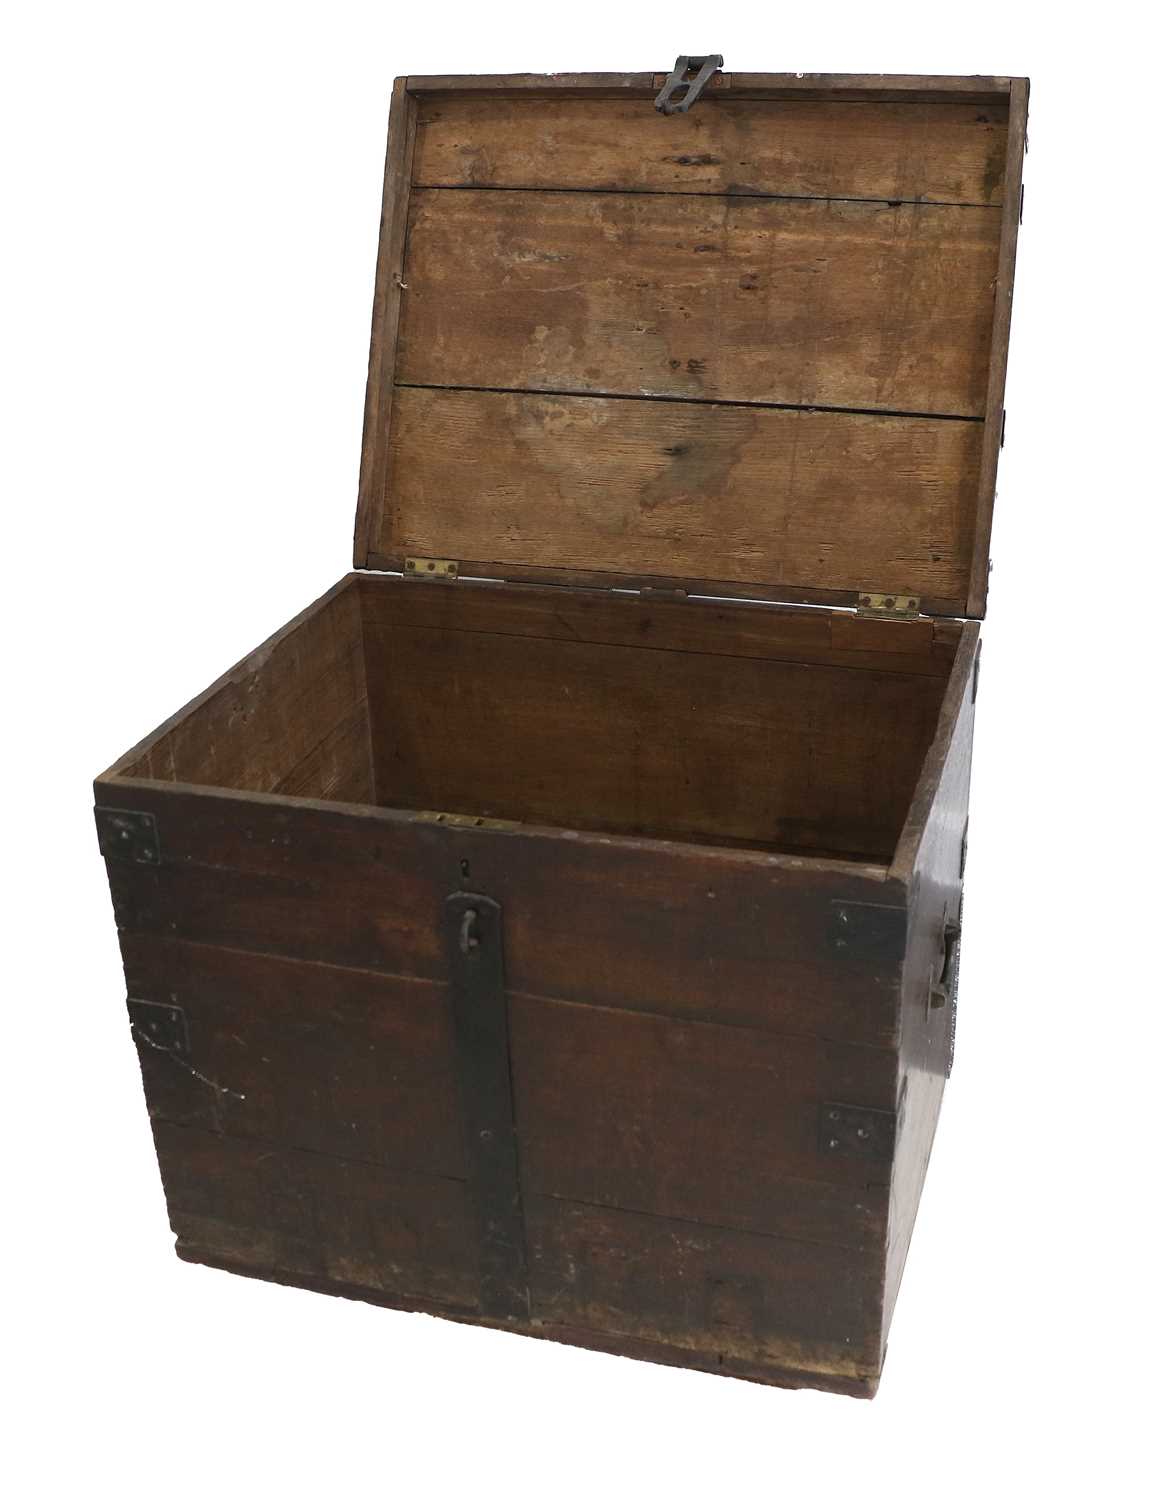 An Early 19th Century Oak and Metal-Bound Silver Chest or Travel Trunk, the hinged lid with an - Image 3 of 3